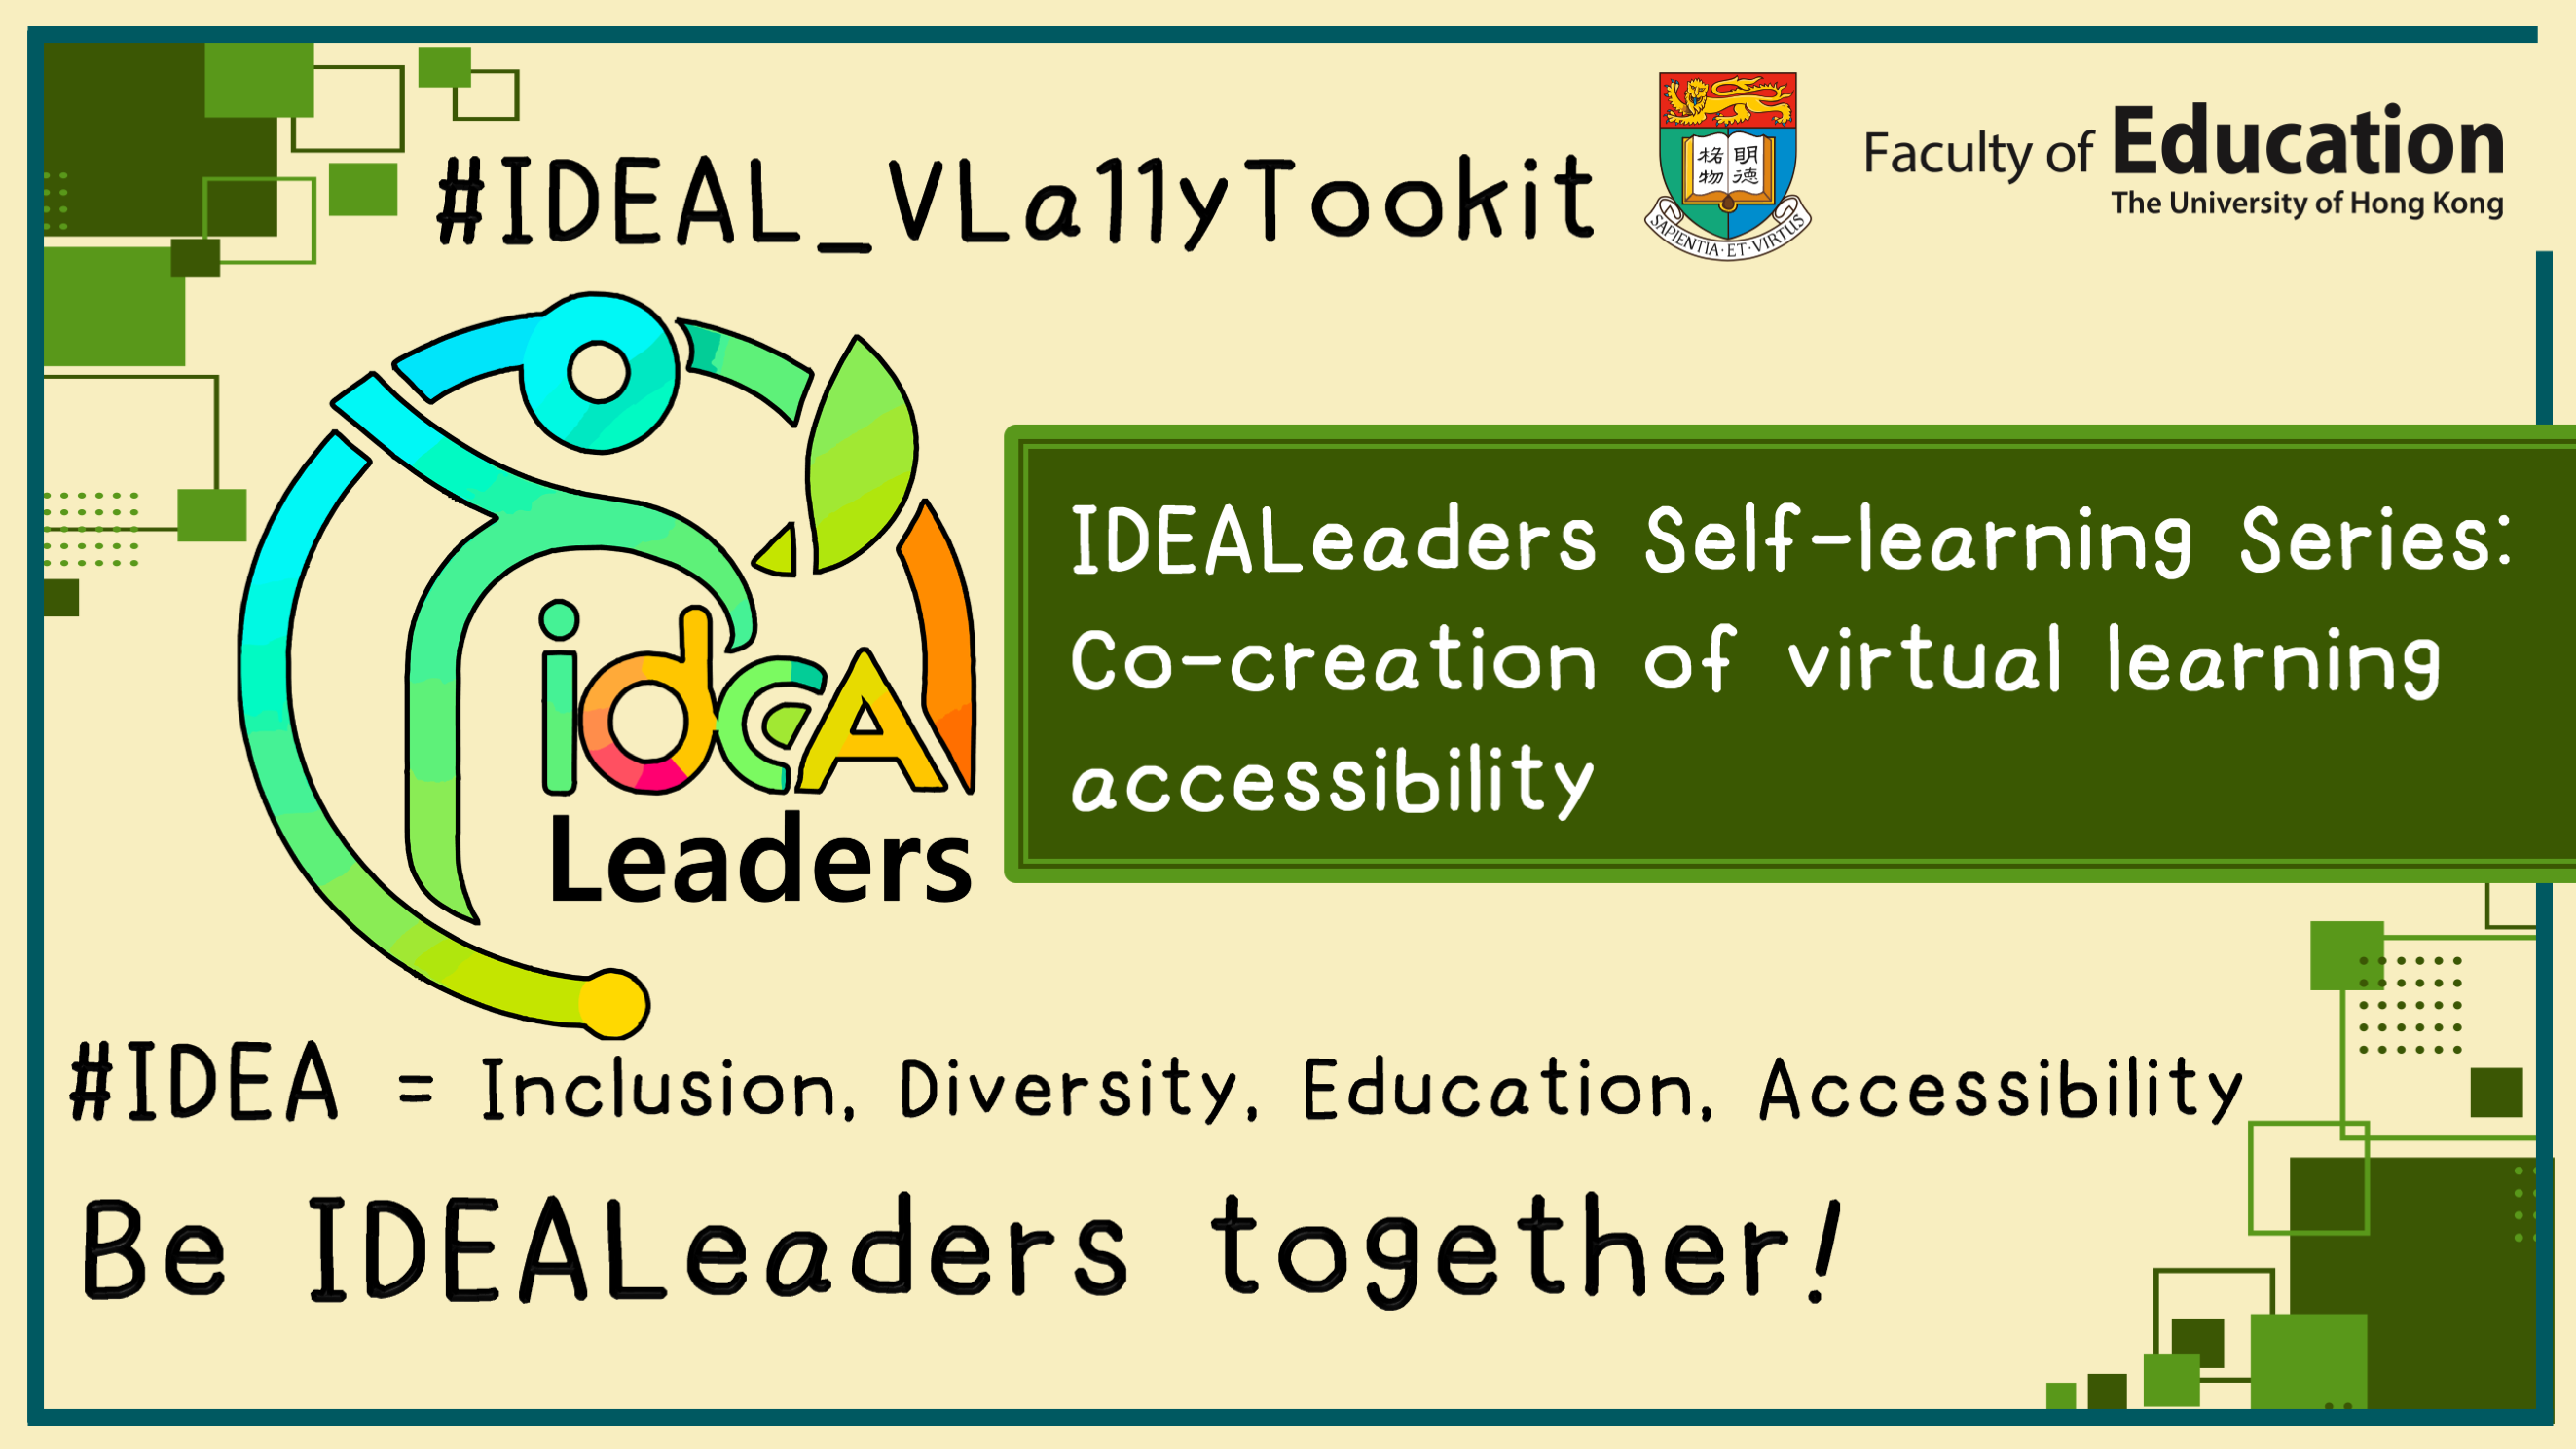 IDEALeaders: Self-Learning Series on Co-creation of Virtual Learning Accessibility IDEAL0001